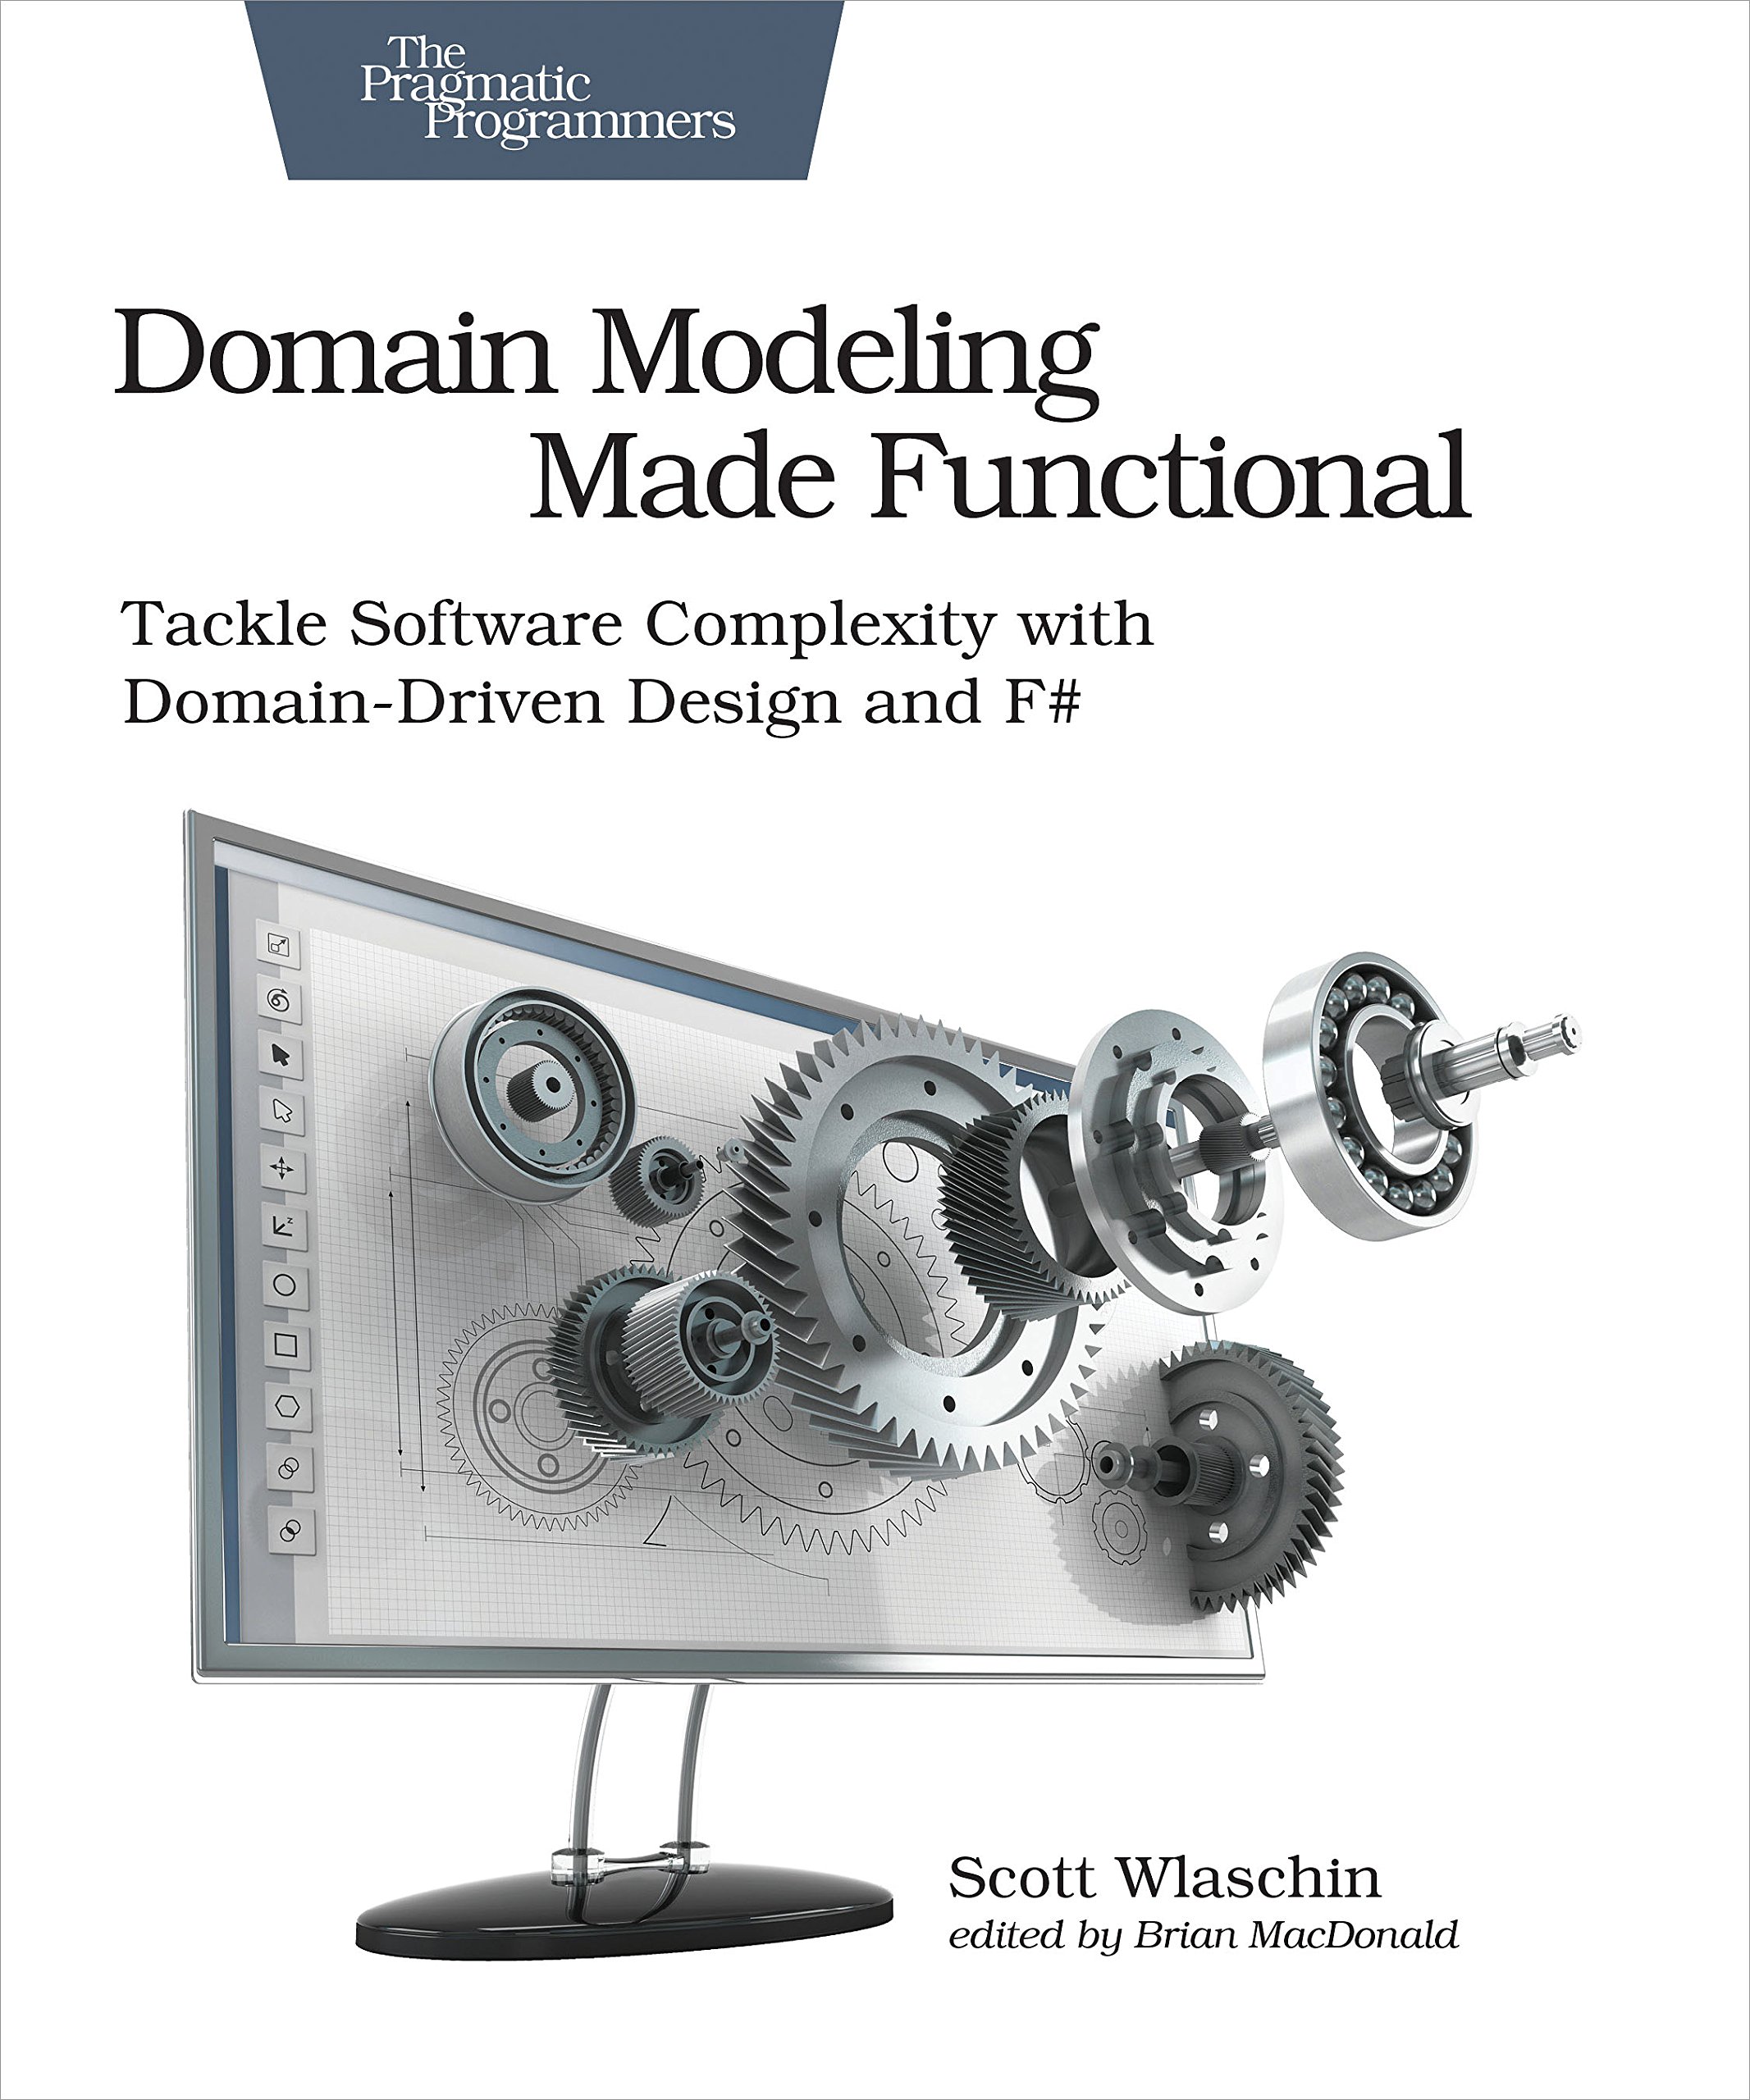 Domain modelling made functional